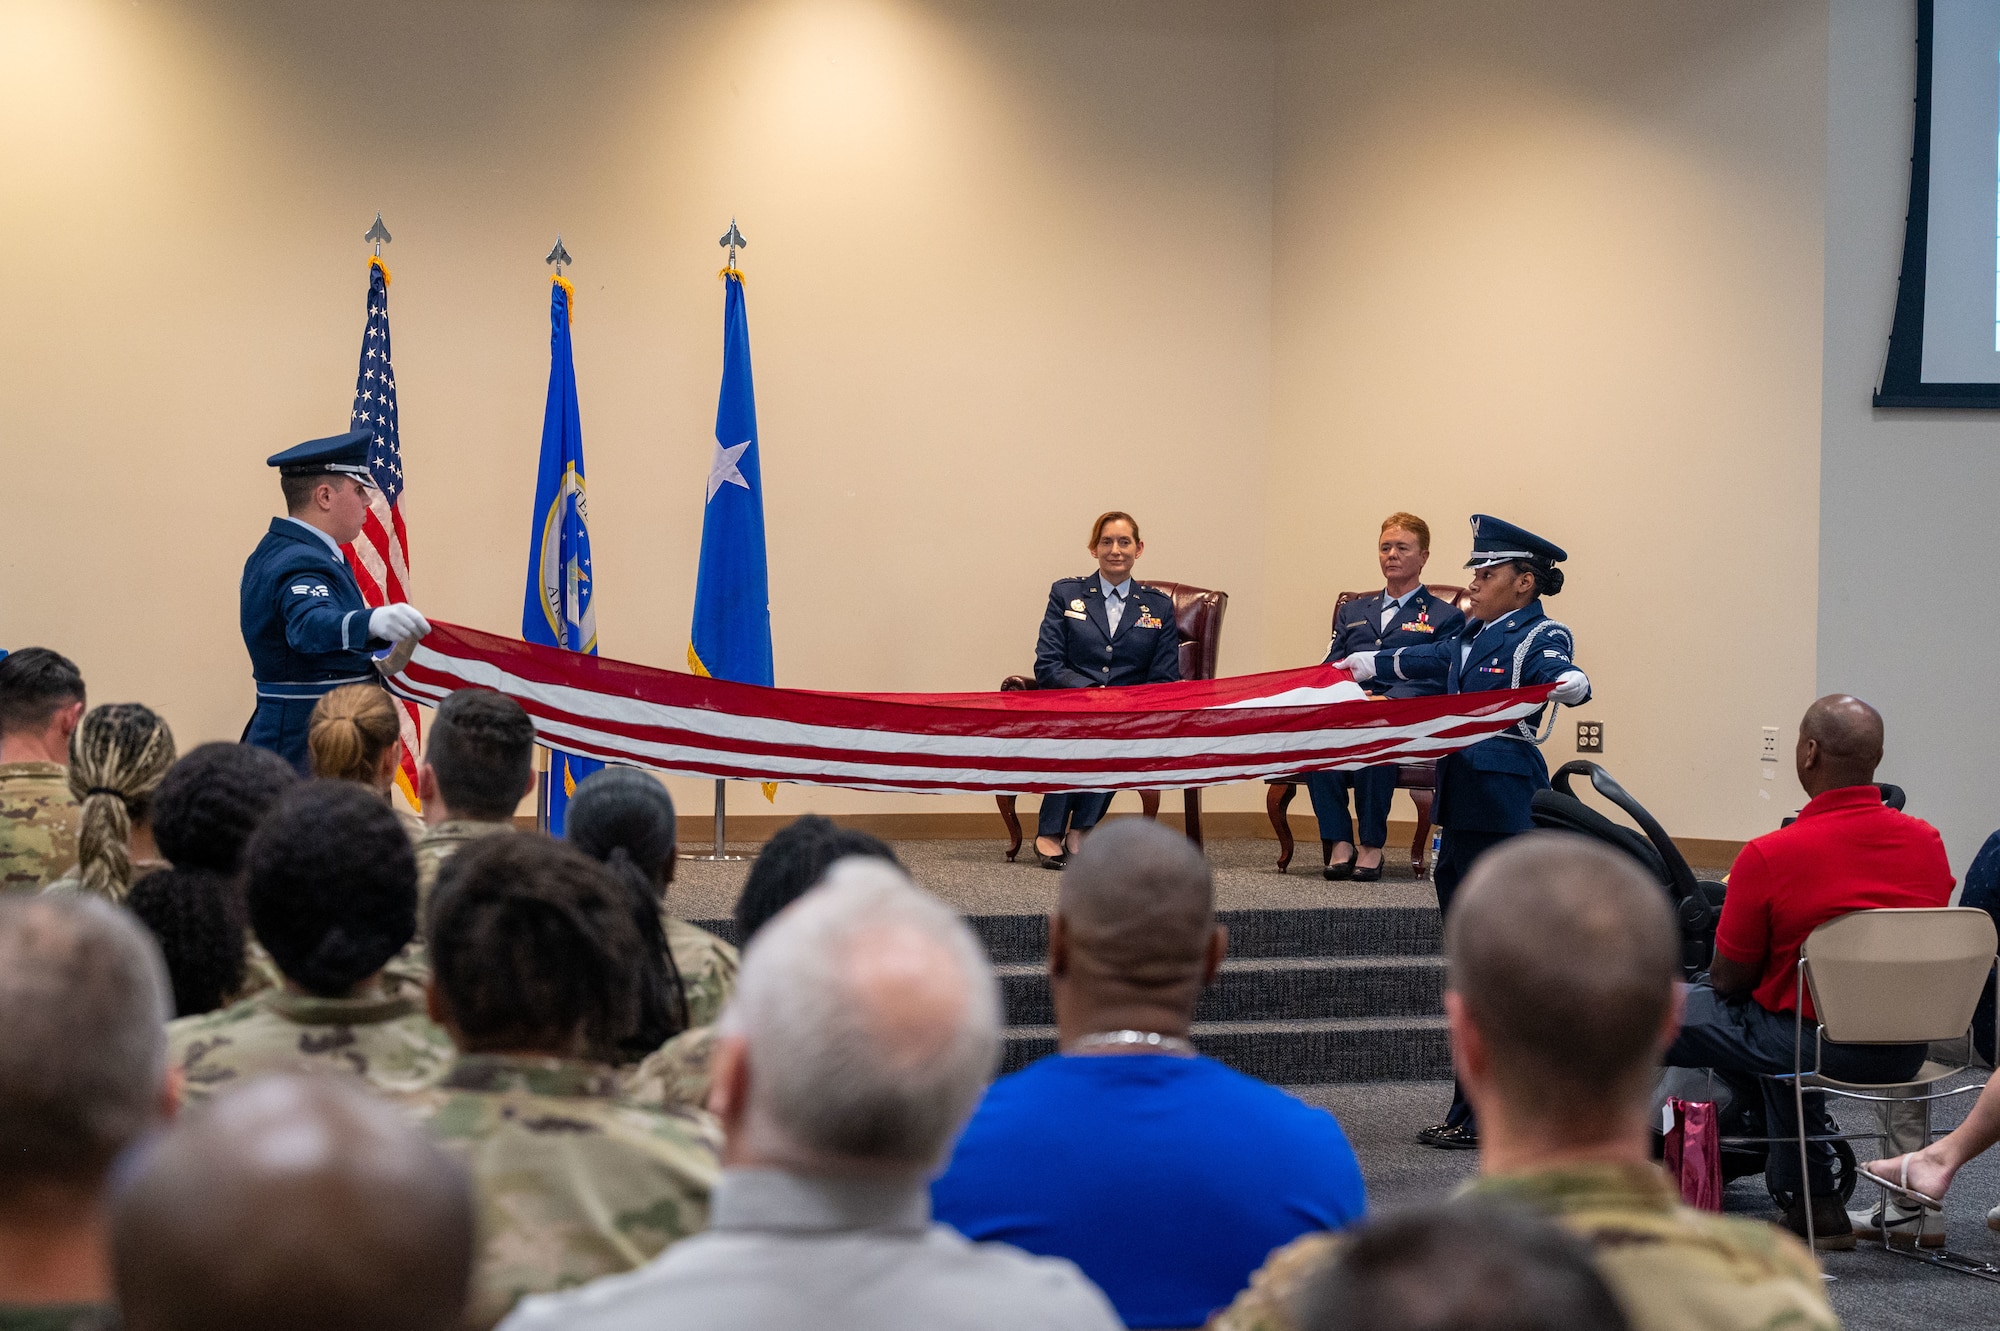 Two Airmen in service dress spread a U.S. flag out. Baldelli and Maj Gen Gunter sit behind watching. Crowd in the foreground also watches.